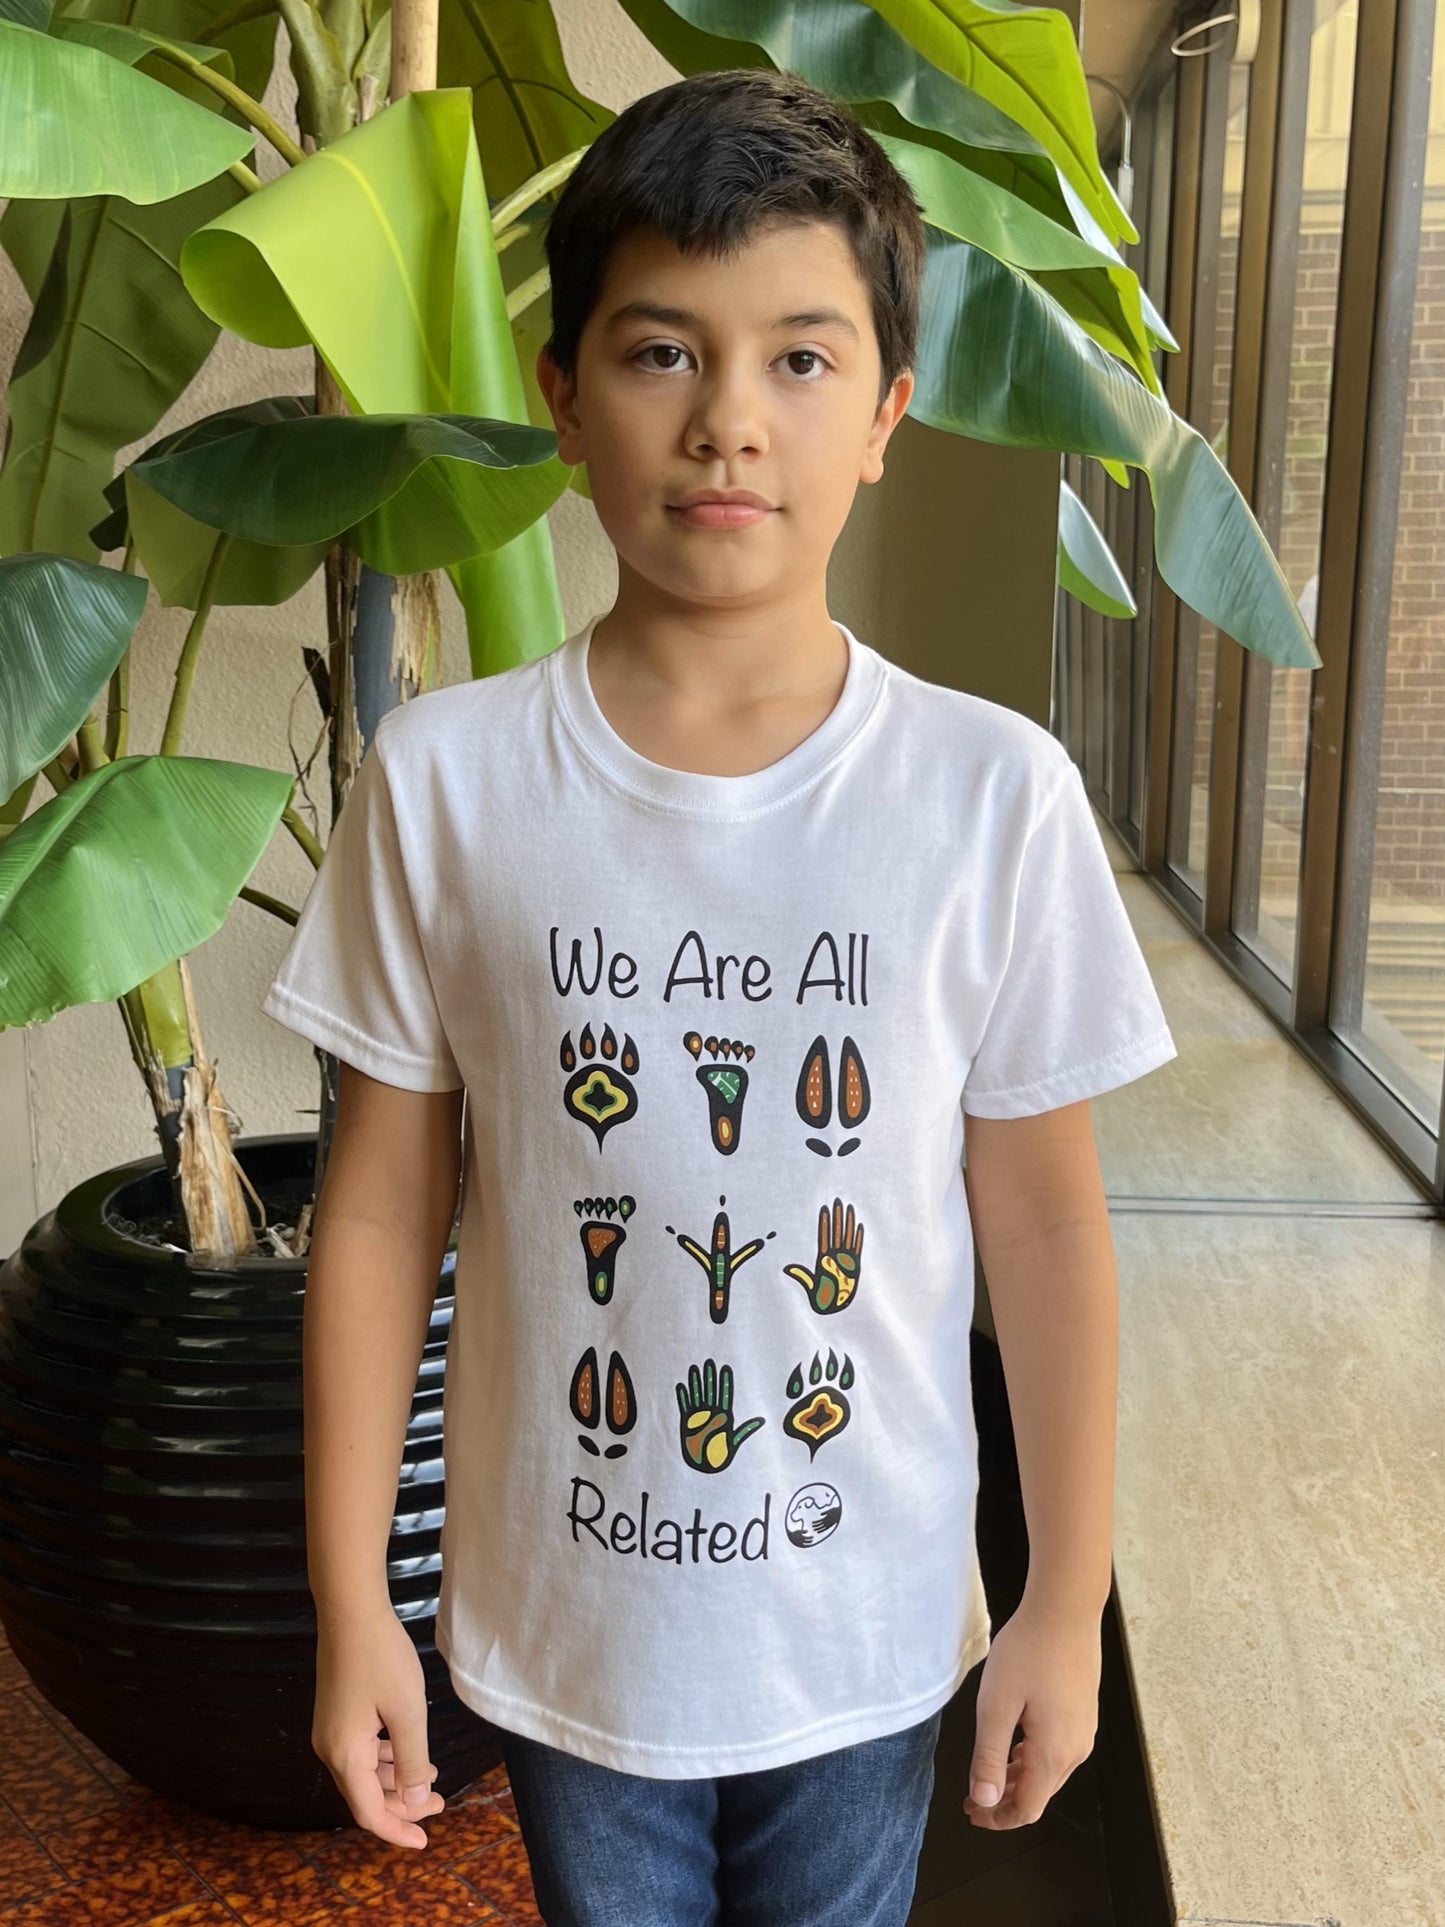 A boy wearing a white t-shirt with the words "We Are All Related" and multi-colour Indigenous-style animal and human footprints.